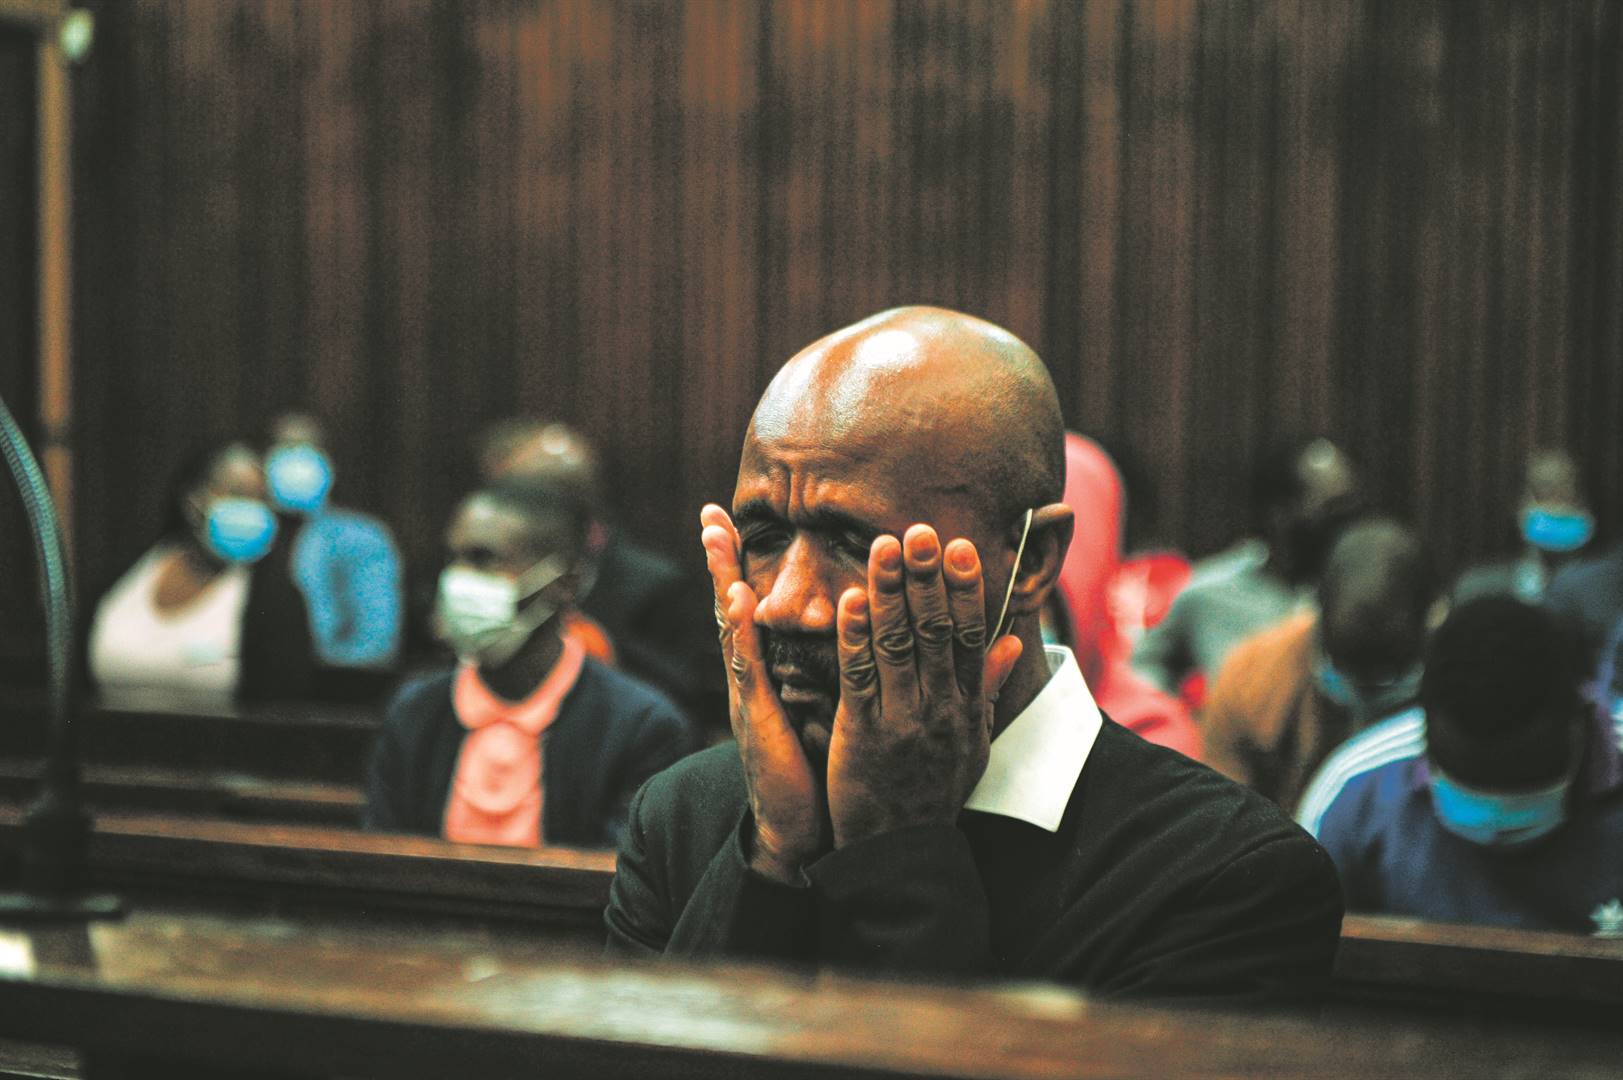 Disbarred advocate Malesela Teffo was expected to appear in the prison court on Wednesday. (Rosetta Msimango/City Press)